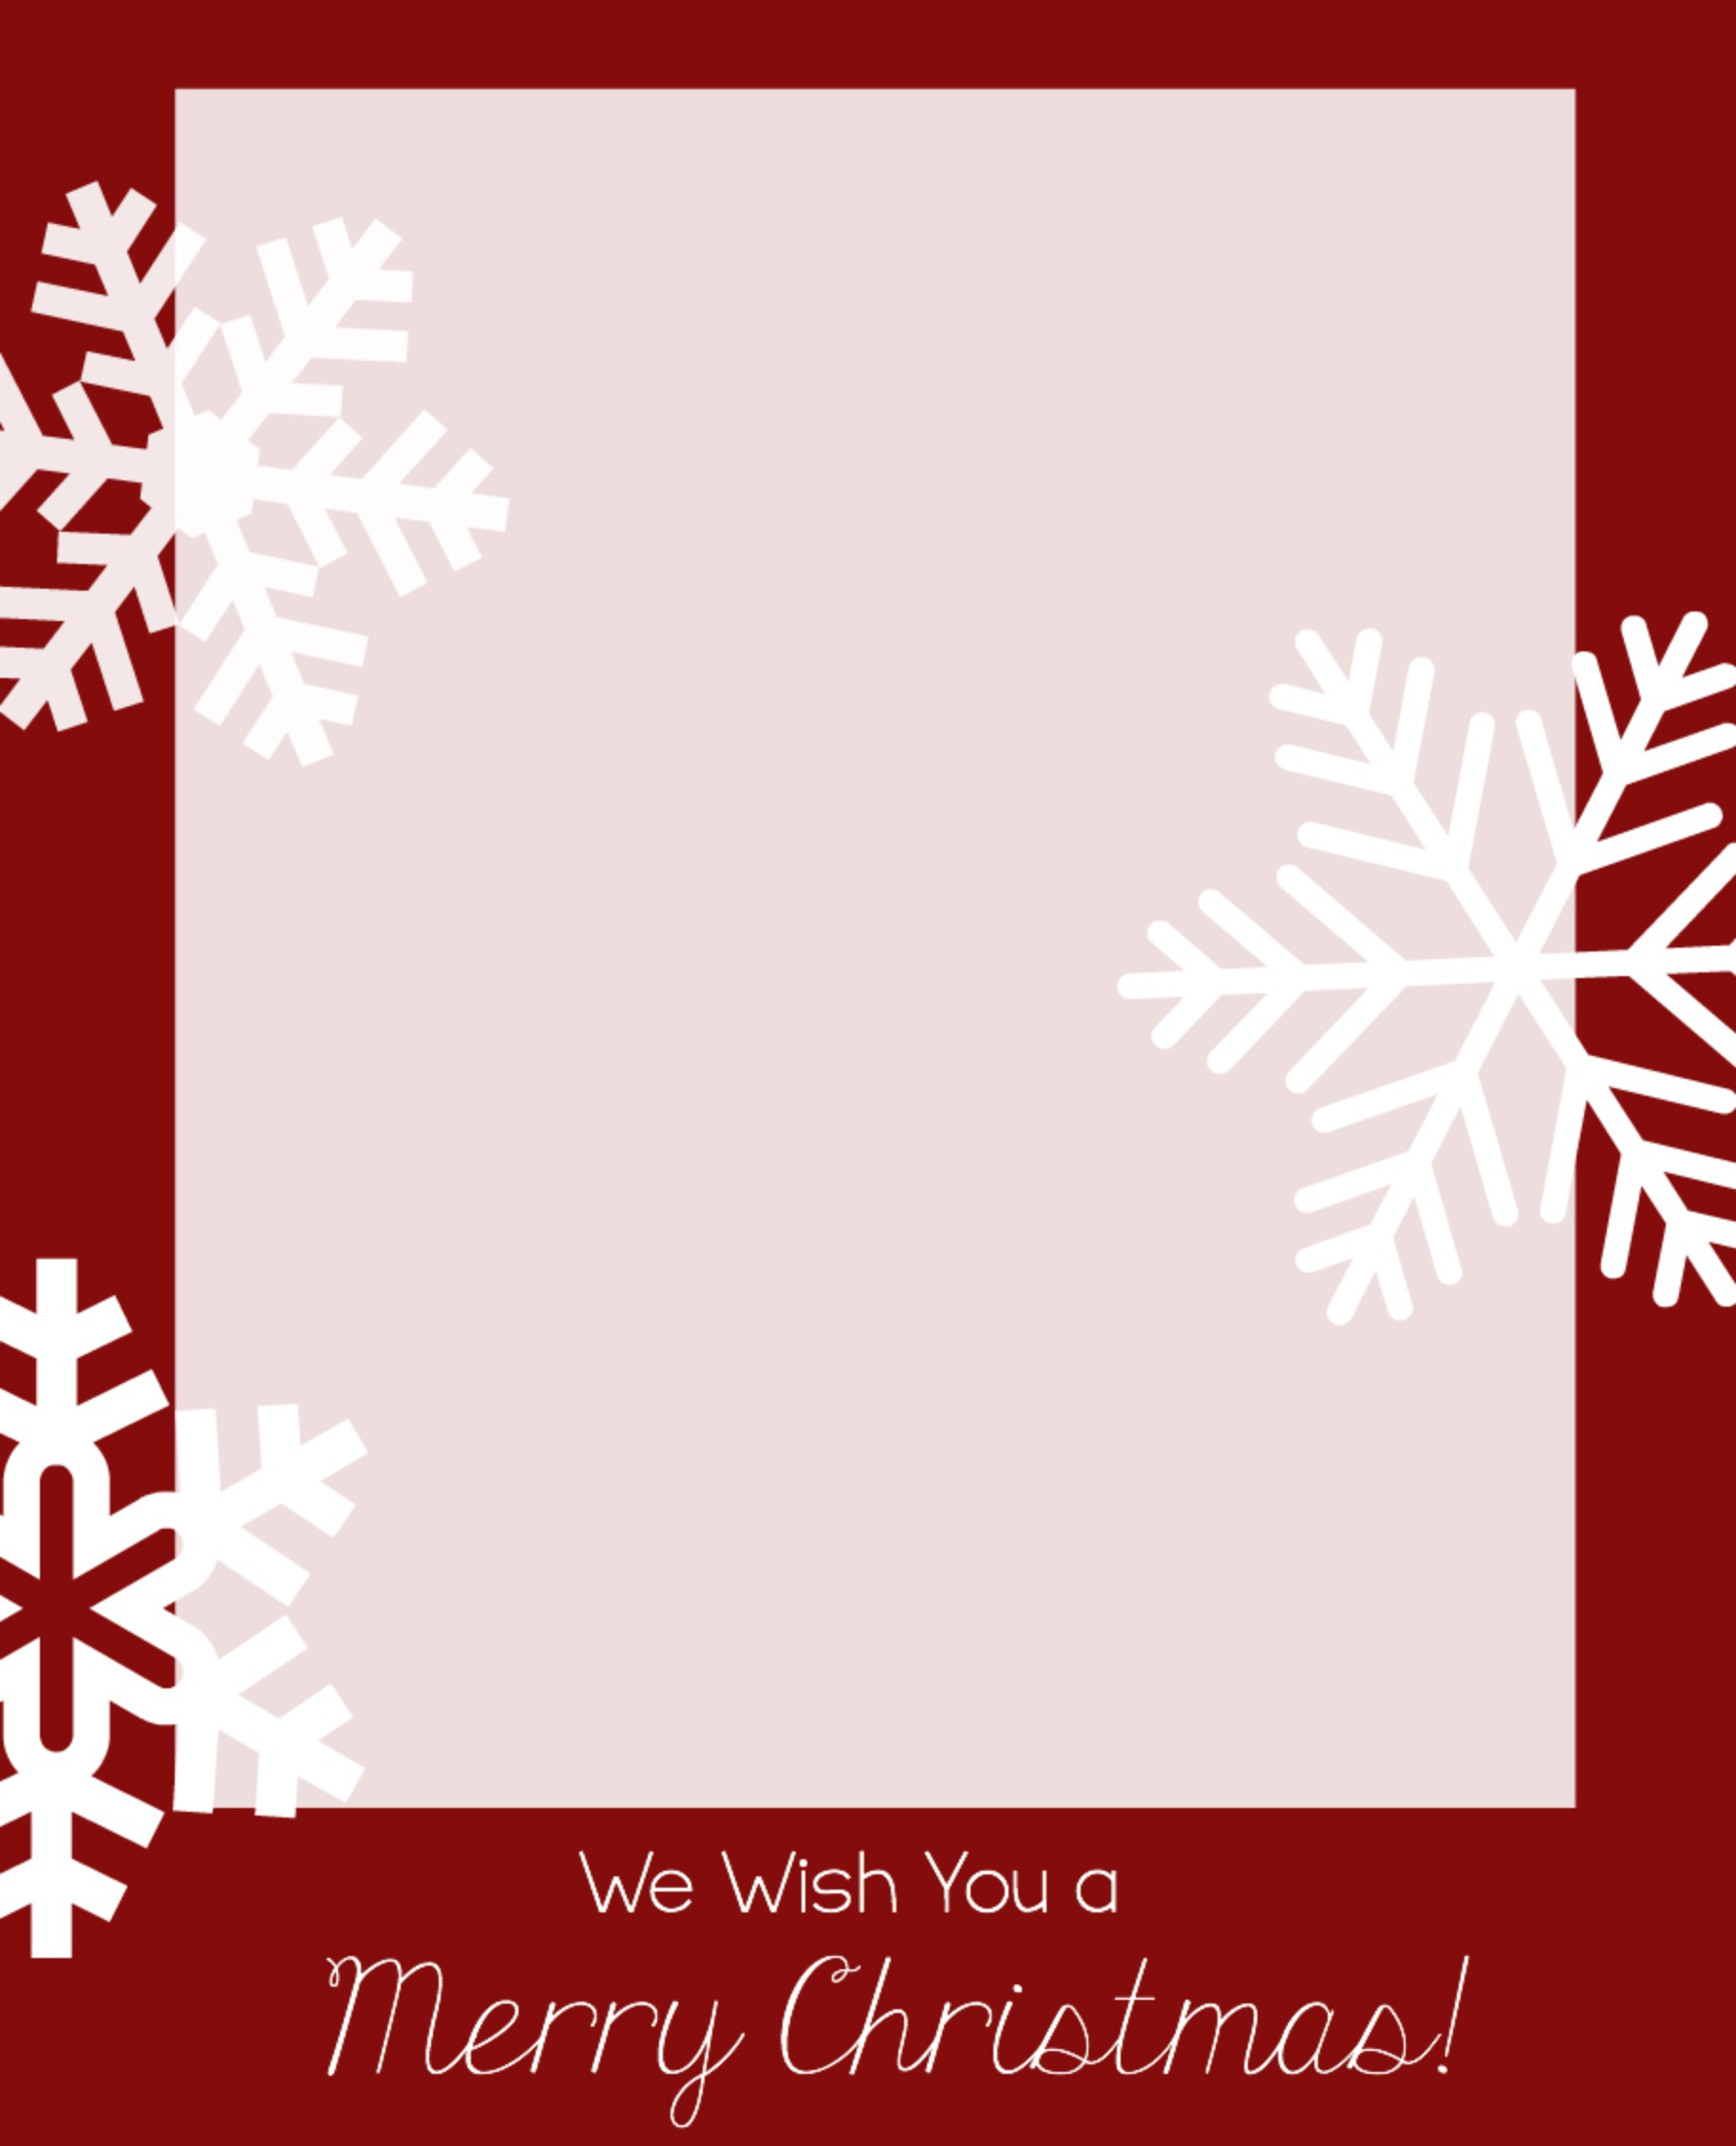 Free Christmas Card Templates - Crazy Little Projects - Christmas Cards Download Free Printable